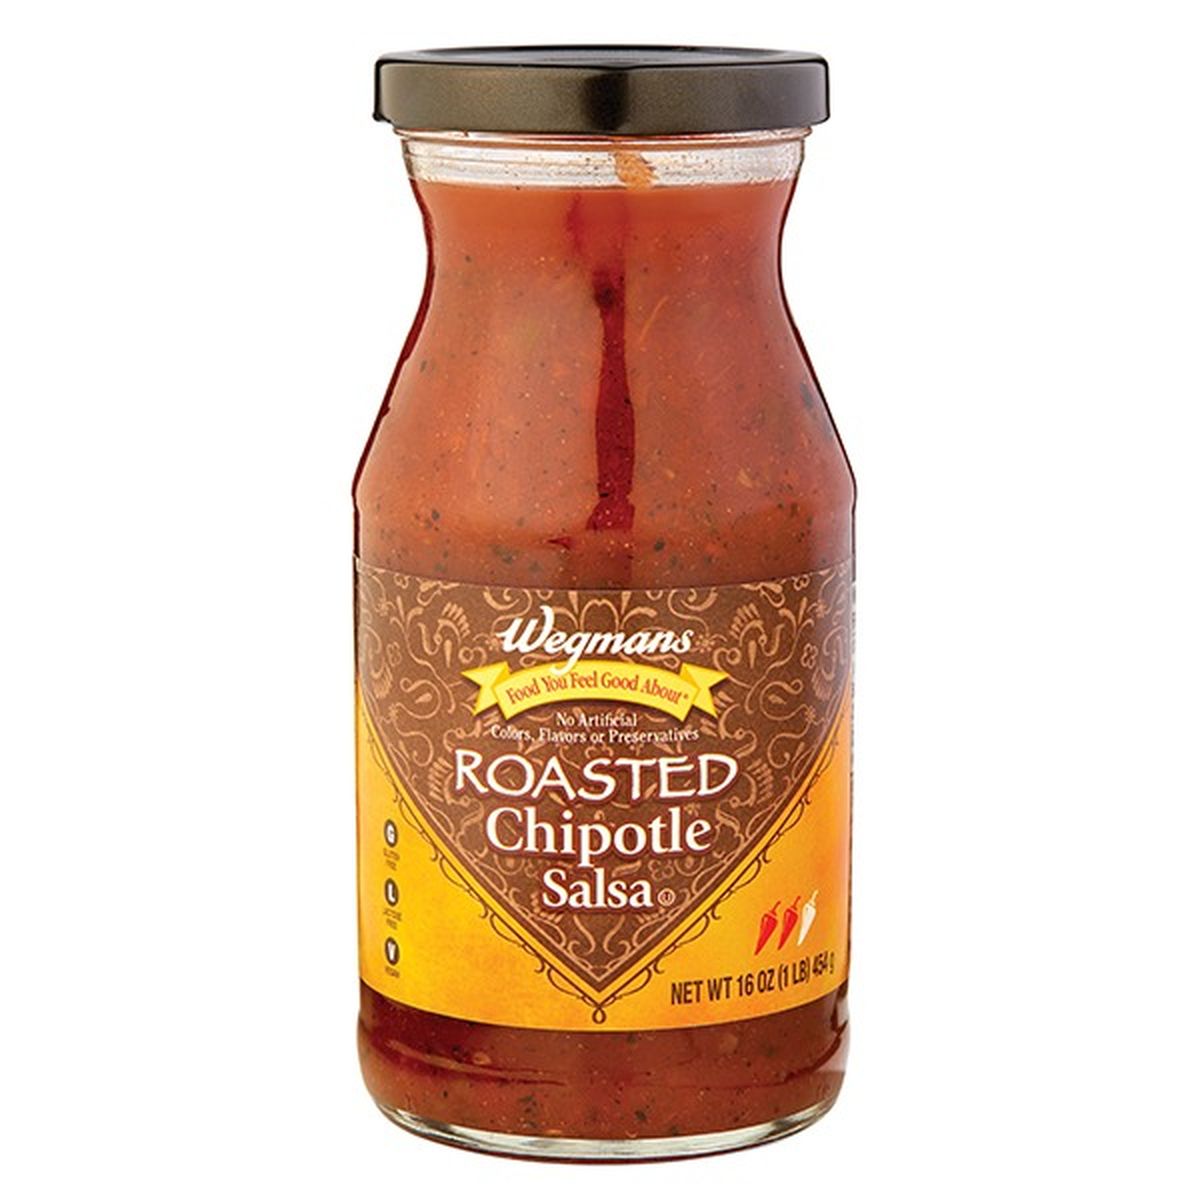 Calories in Wegmans Salsa, Roasted Chipotle